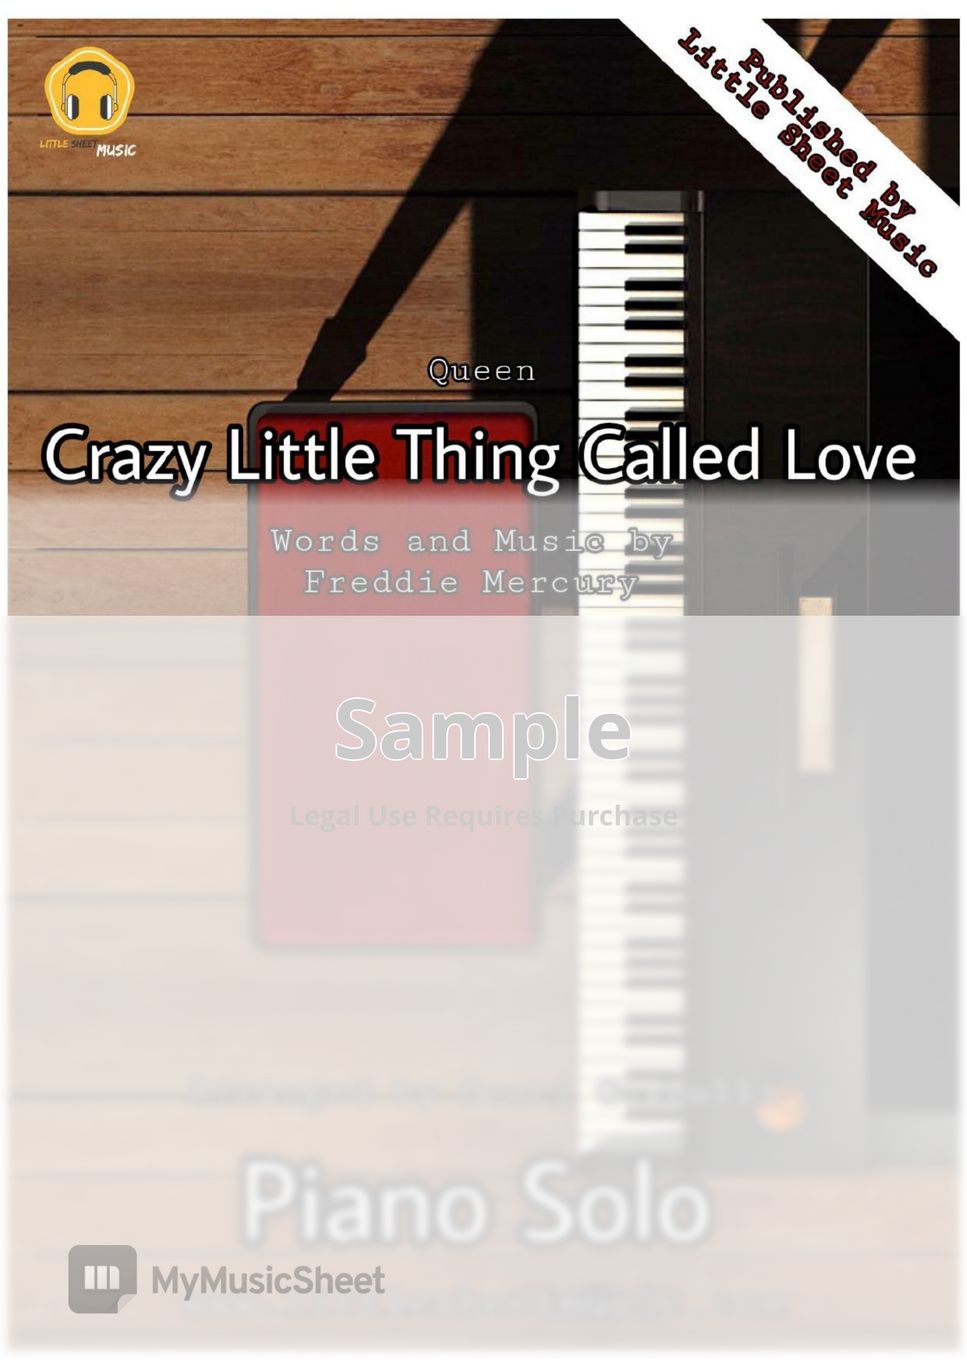 Queen - Crazy Little Thing Called Love by Genti Guxholli